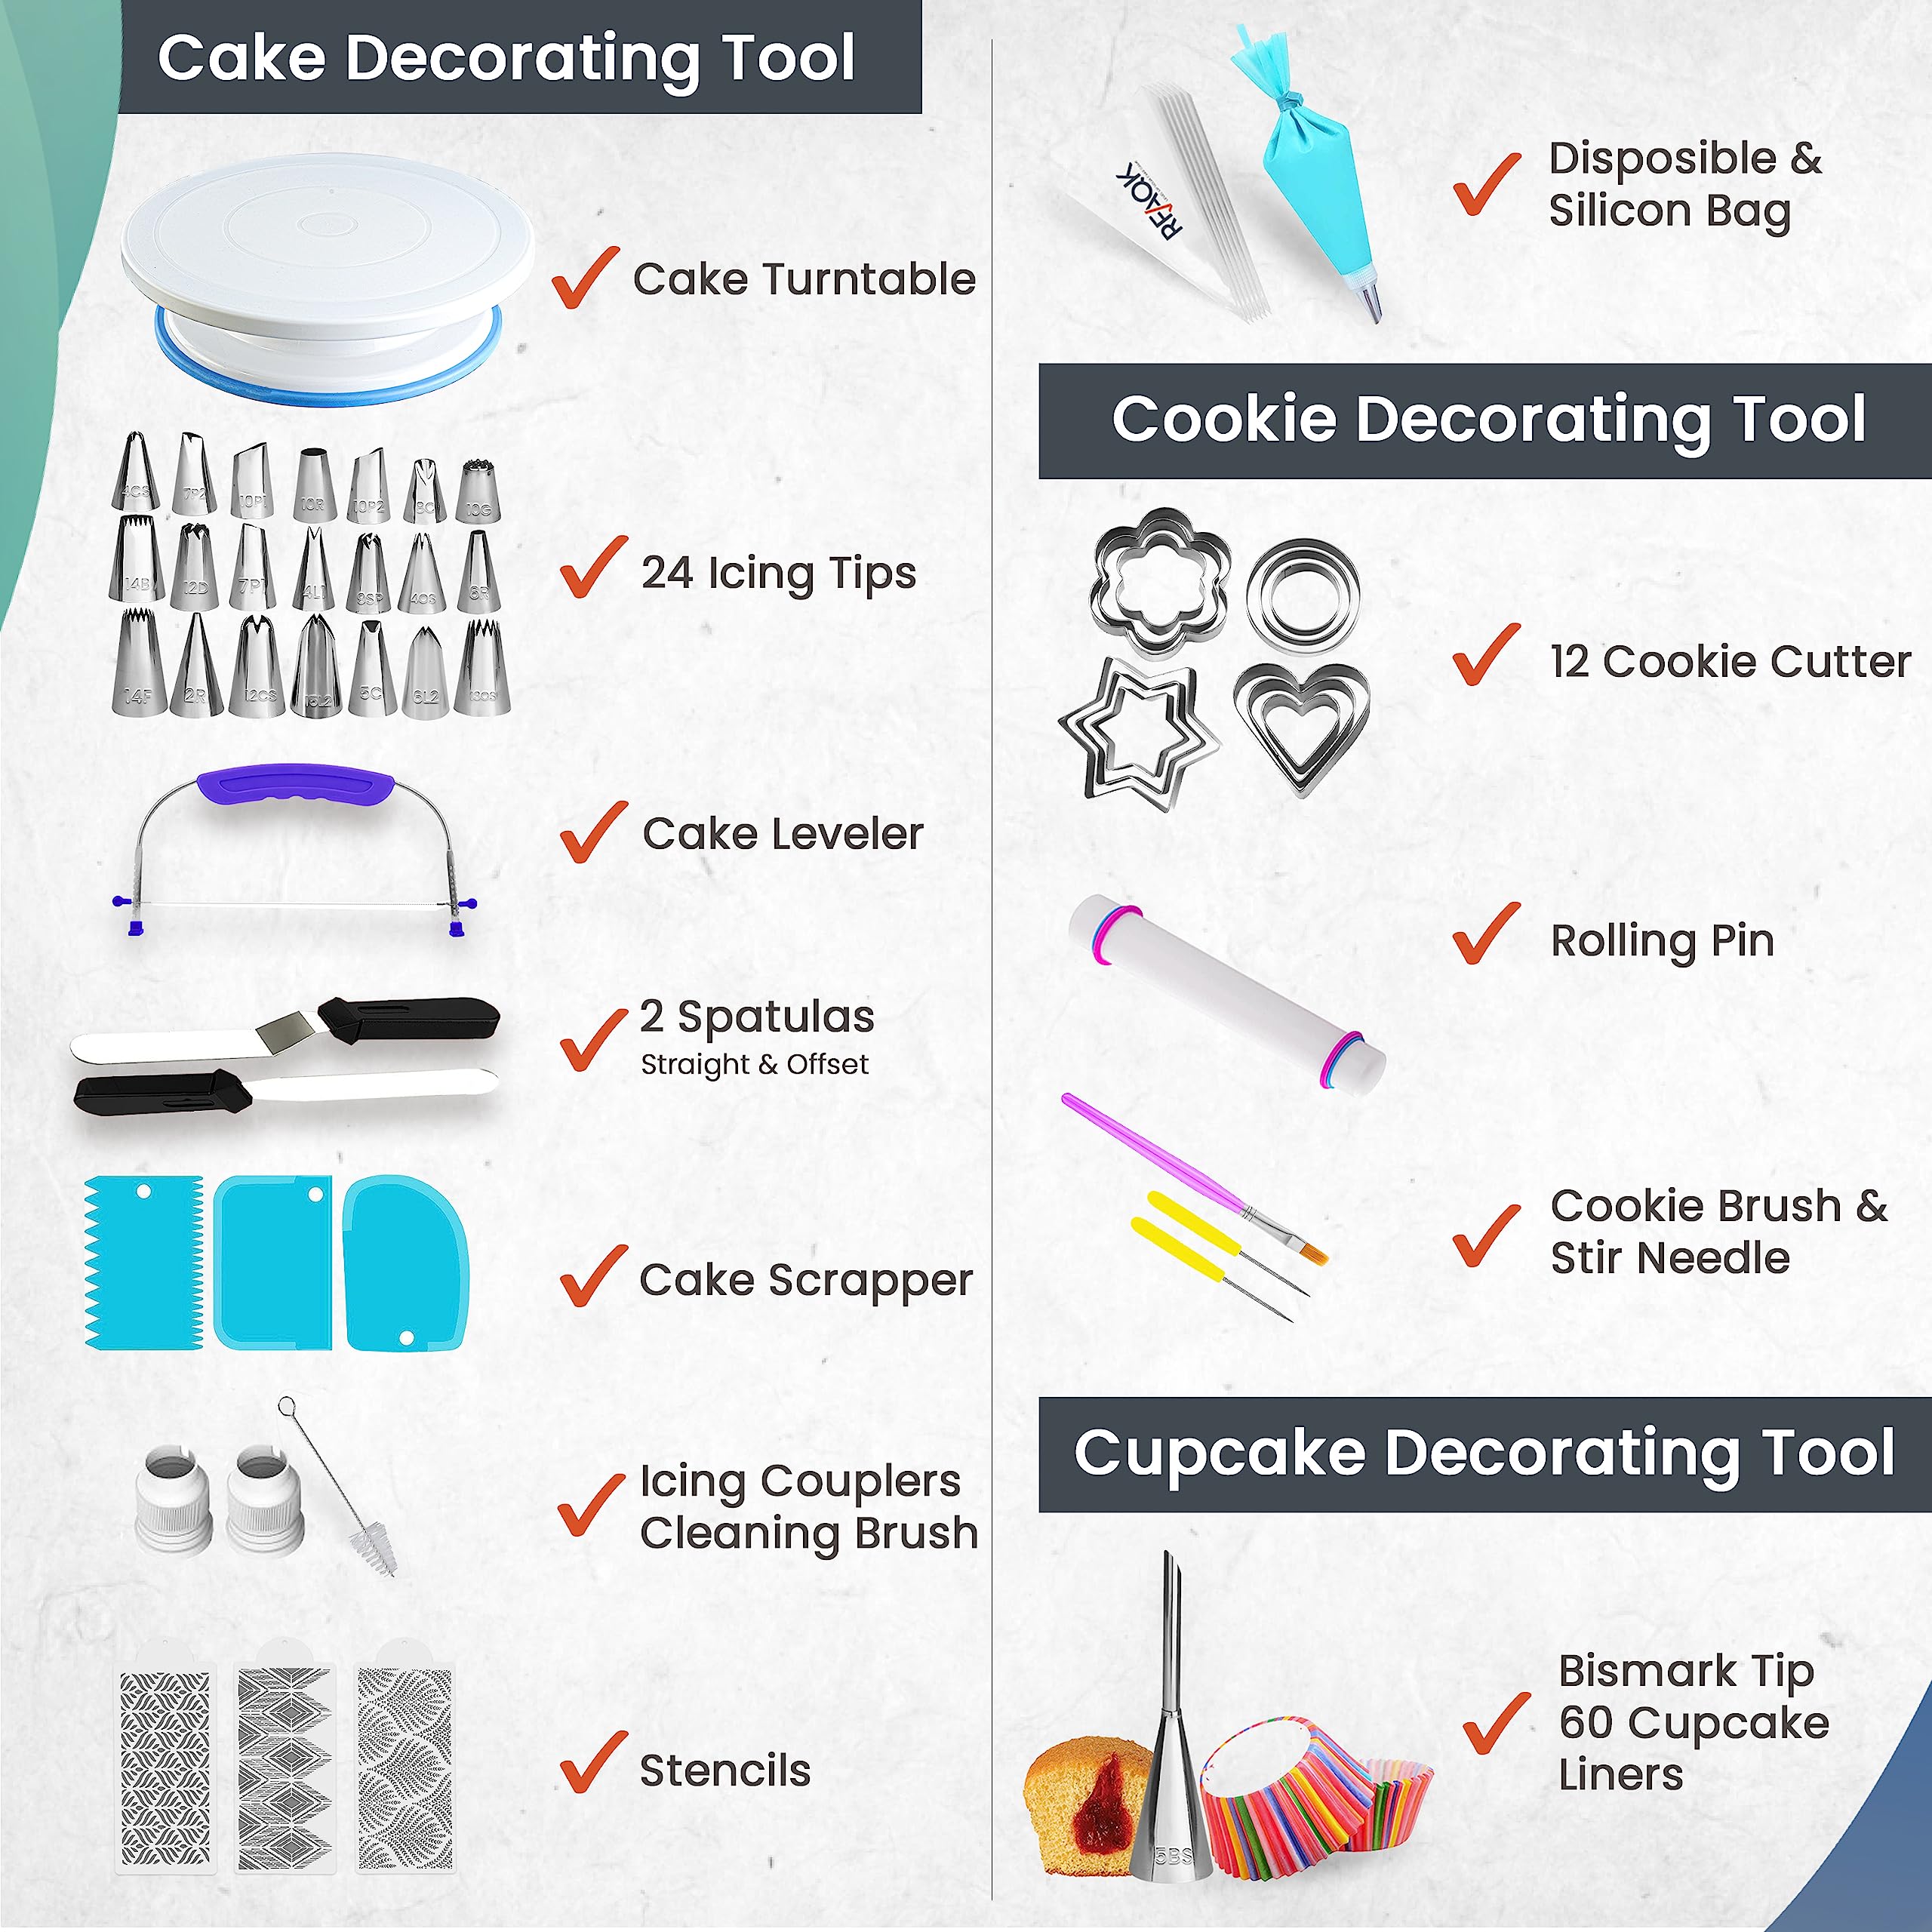 150PCs Cake Decorating Supplies Kit - 3in1 Cupcake, Cookie & Cake Decorating Tools, Cake Turntable for Decorating with Piping Bags and Tips Set, Leveler, Baking supplies Tools, Booklet & much more